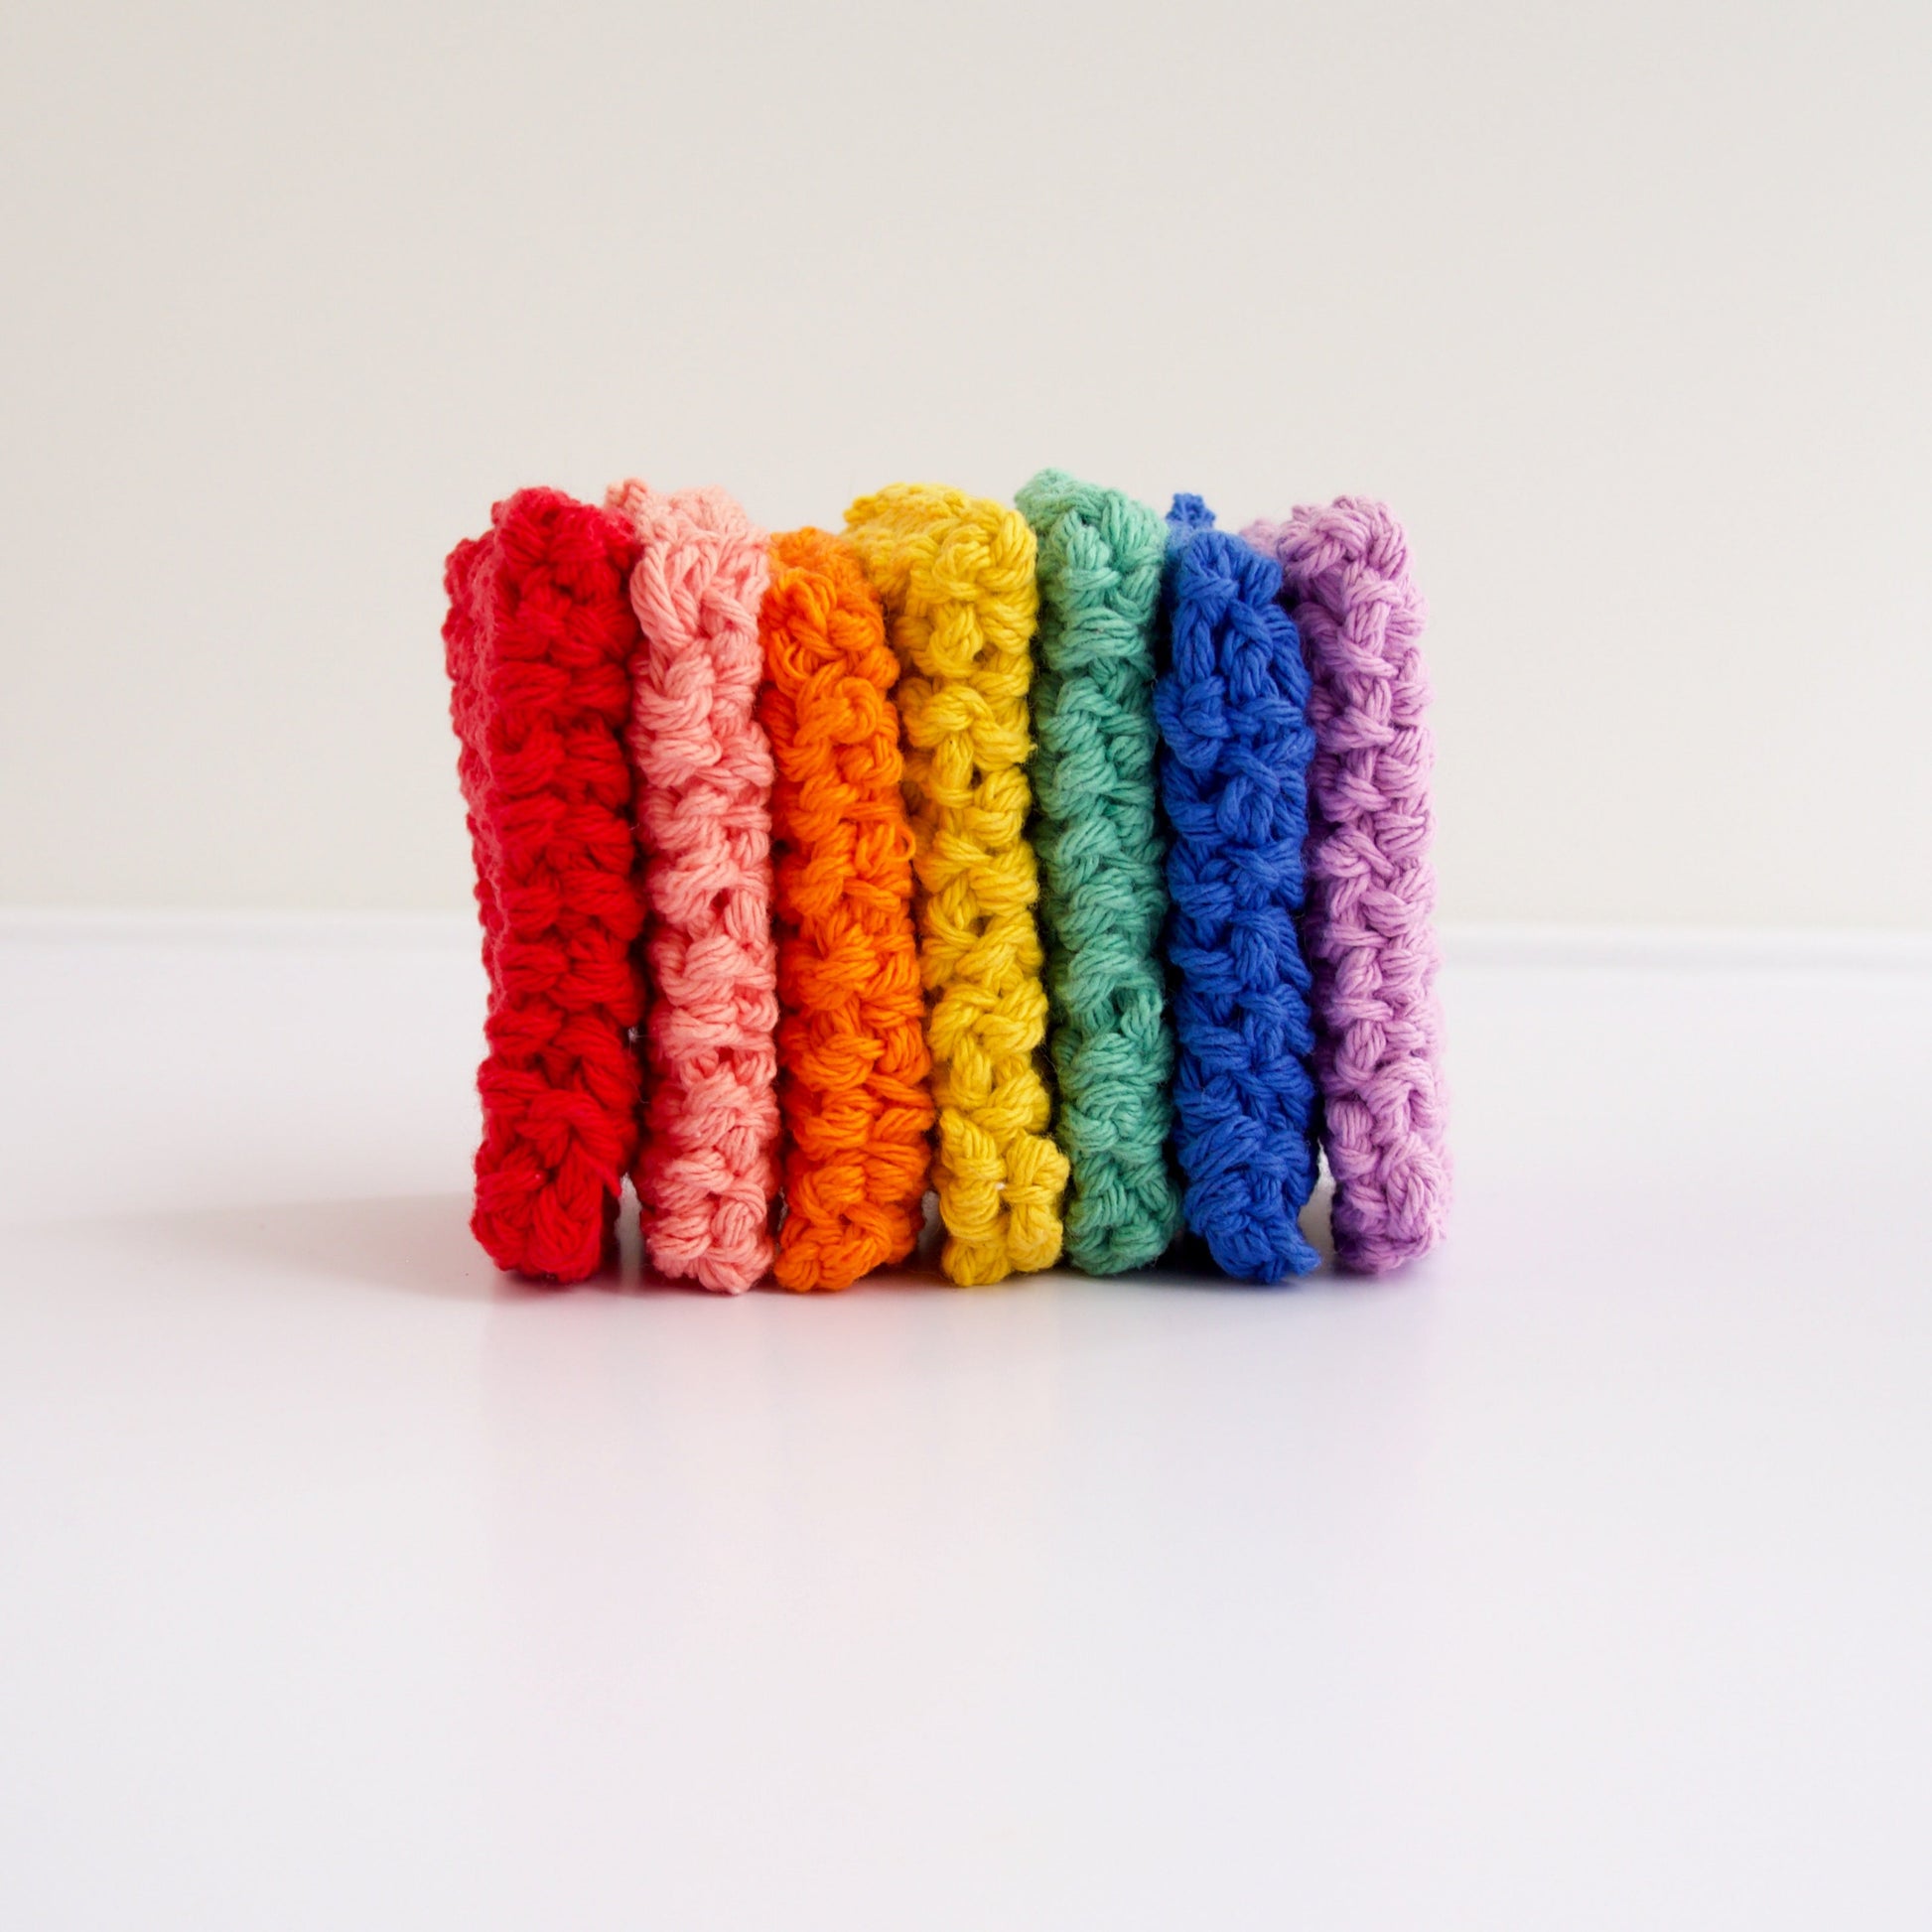 7 reusable cotton sponges lined up in a rainbow of colors from left to right, red, pink, orange, yellow, green, blue, light purple